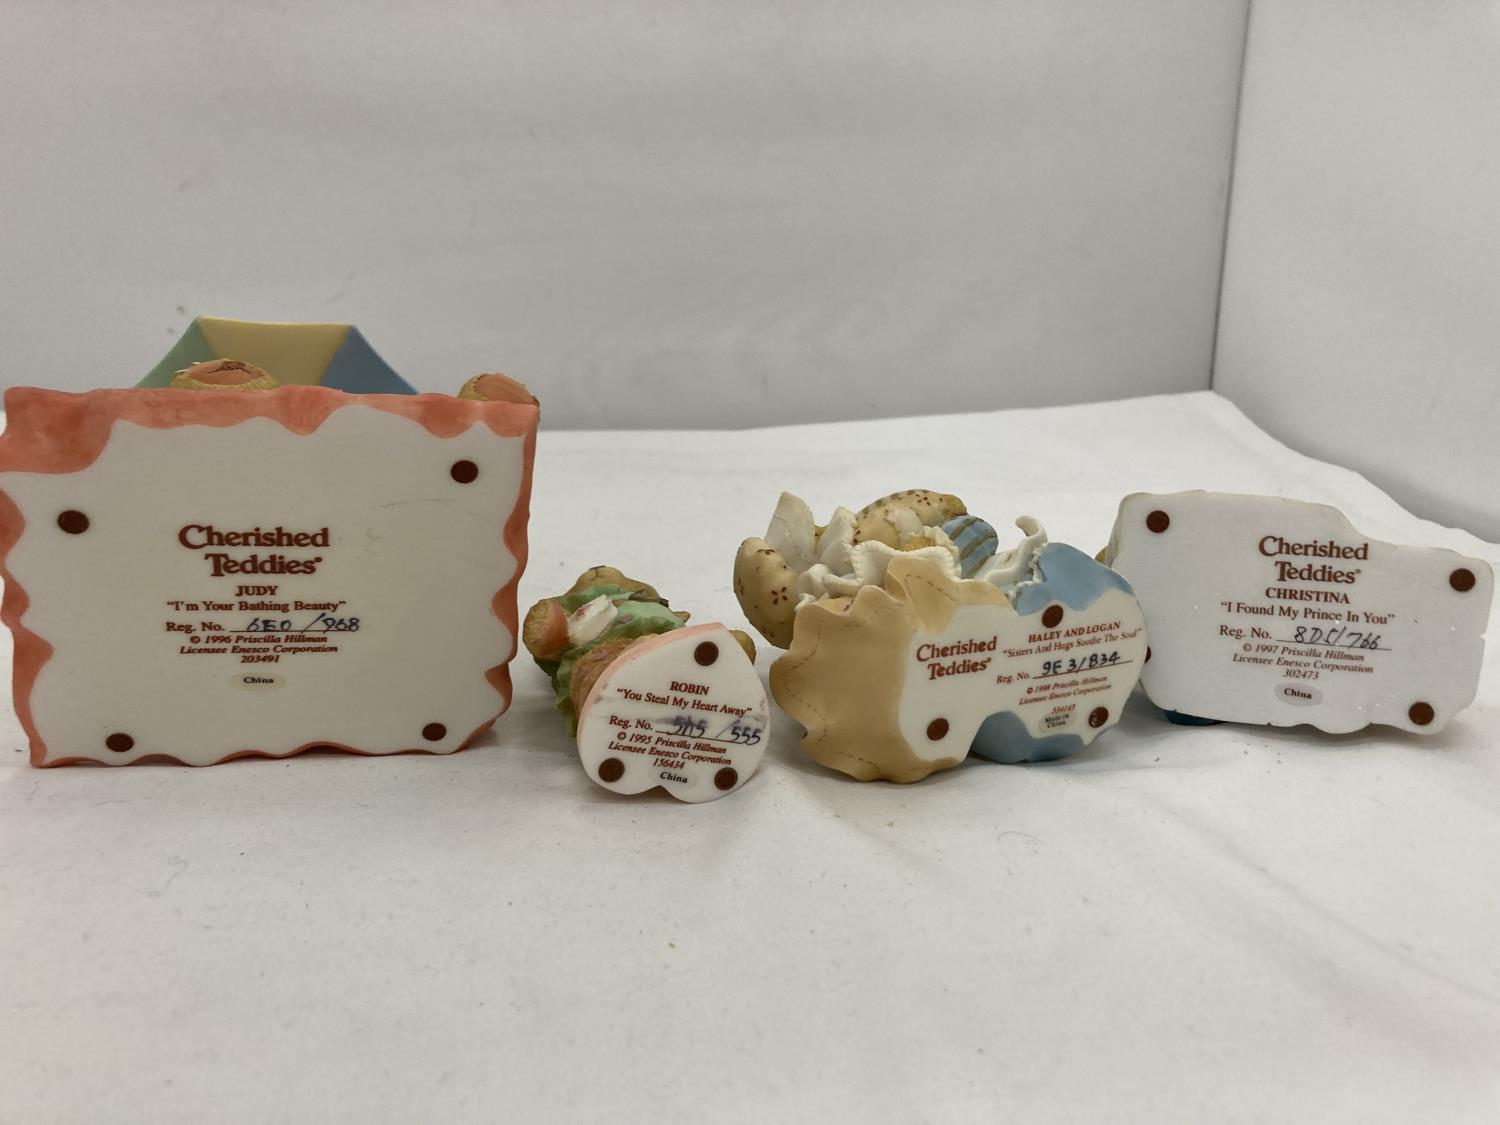 FOUR LIMITED EDITION CHERISHED TEDDIES, 'CHRISTINA', 'ROBIN', 'HALEY AND LOGAN', AND 'JUDY' - Image 12 of 12